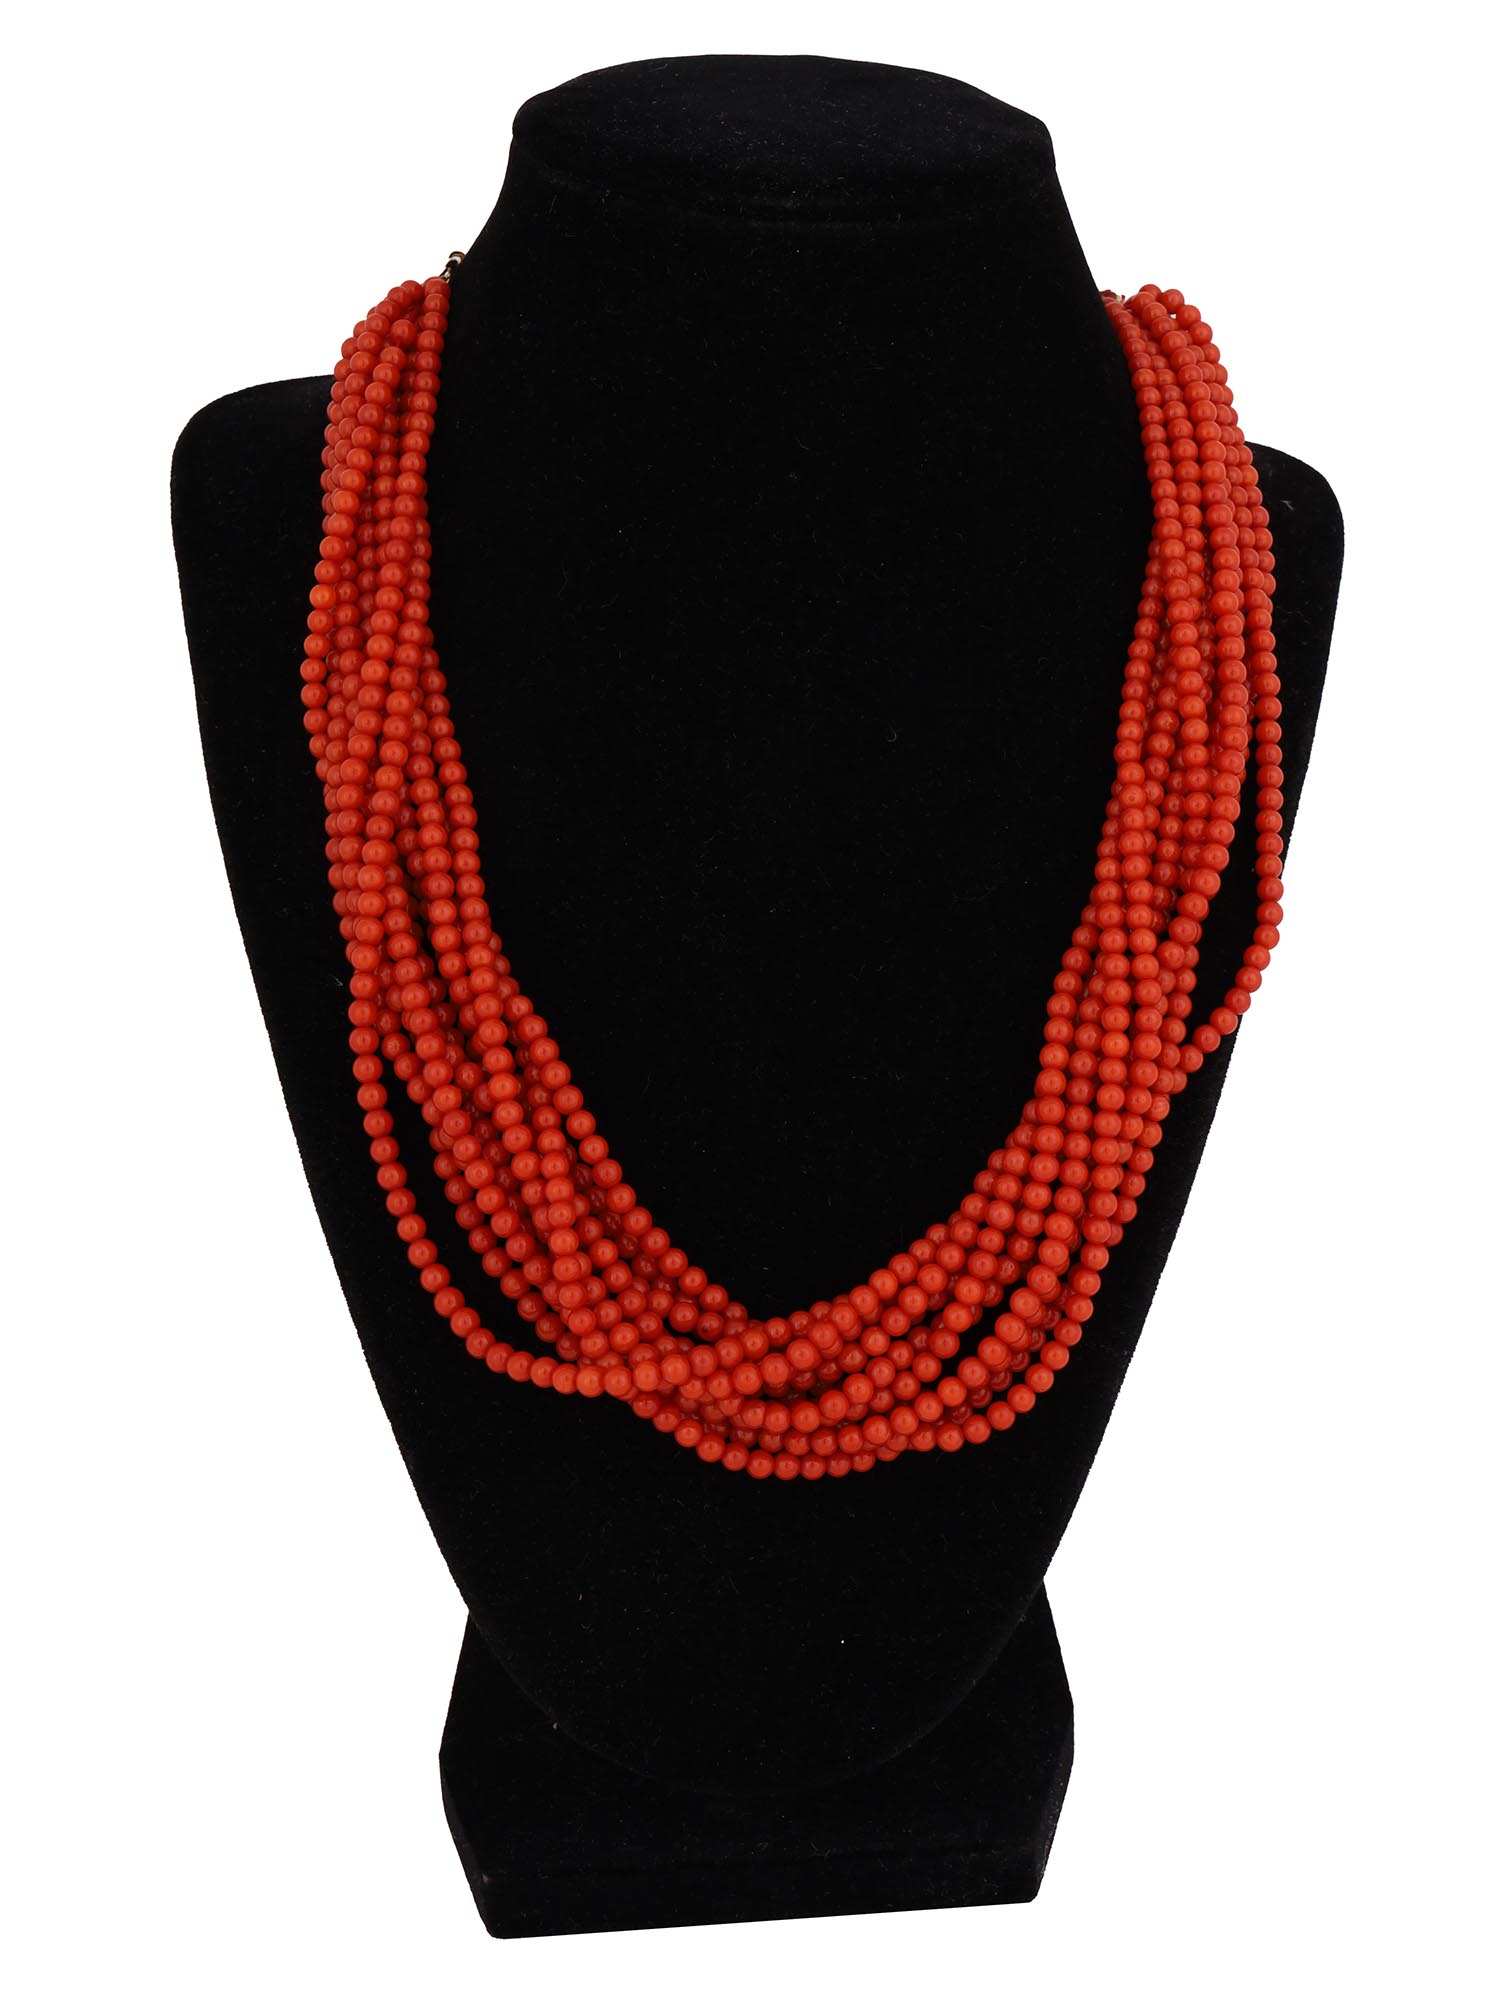 14K GOLD AND RED CORAL MULTILAYER BEADED NECKLACE PIC-0